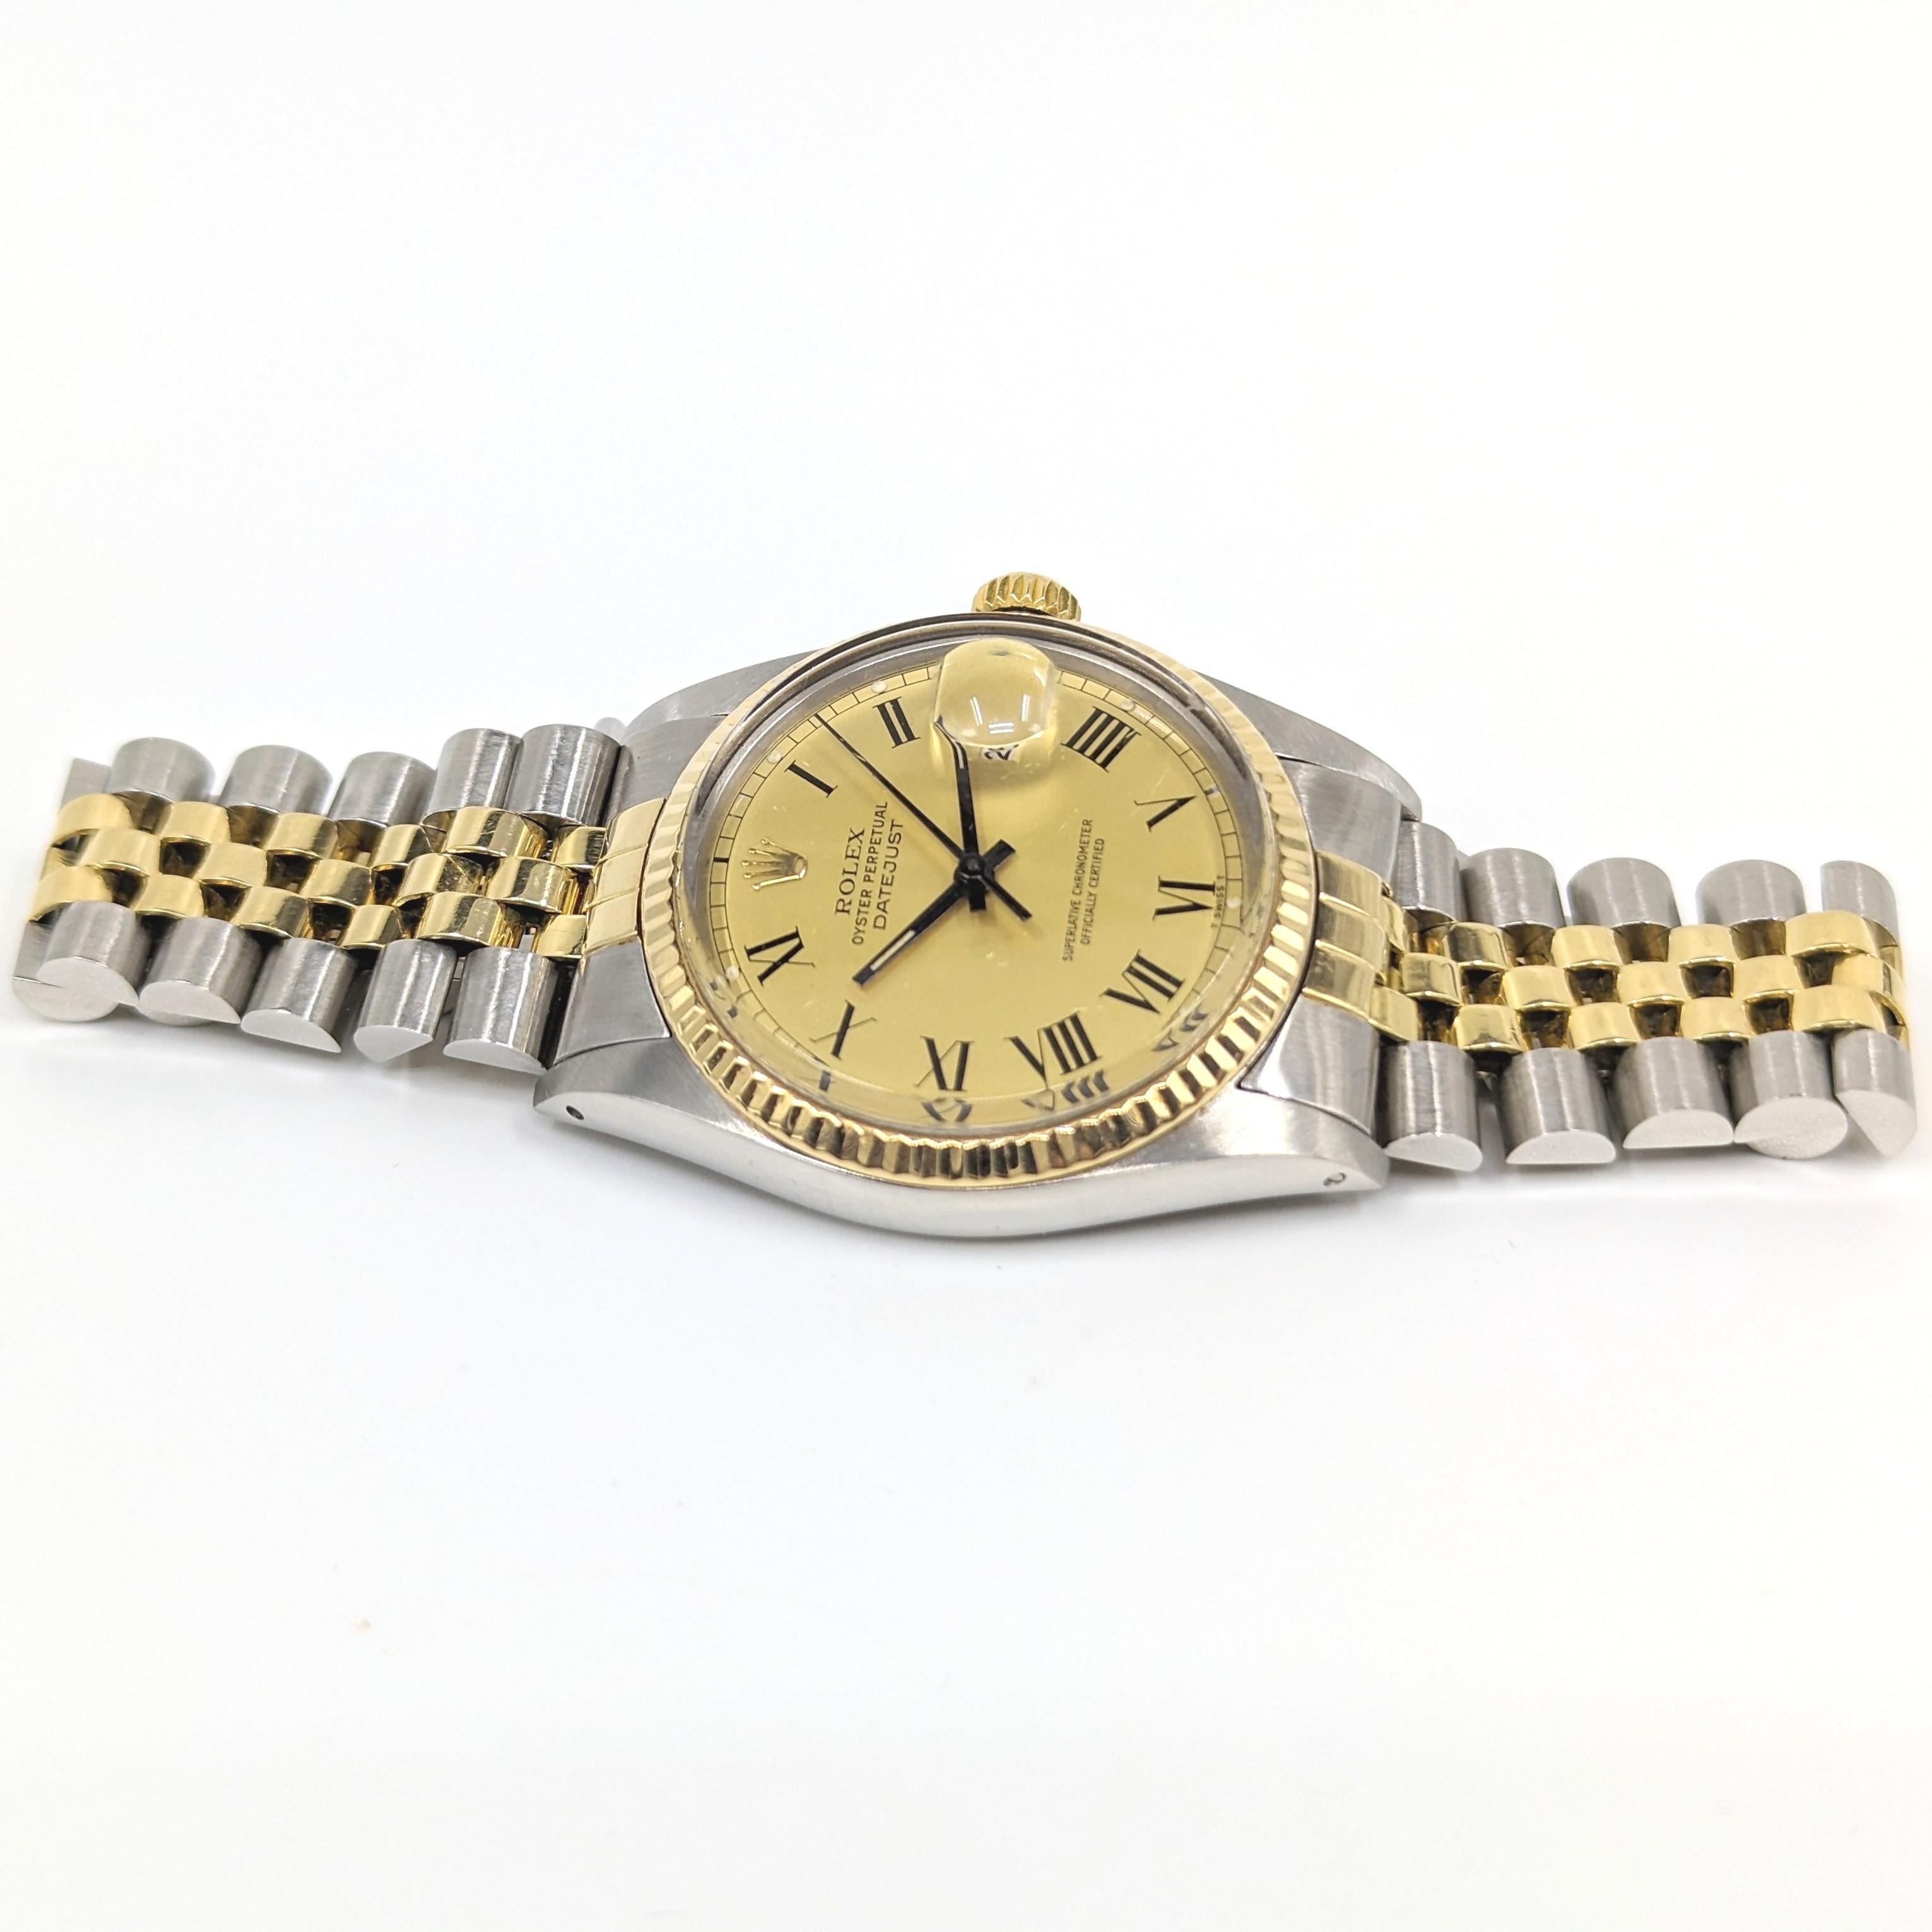 Rolex Oyster Perpetual Datejust 18k/SS YG 2tone Watch Collectible Buckley 16013 en vente 2